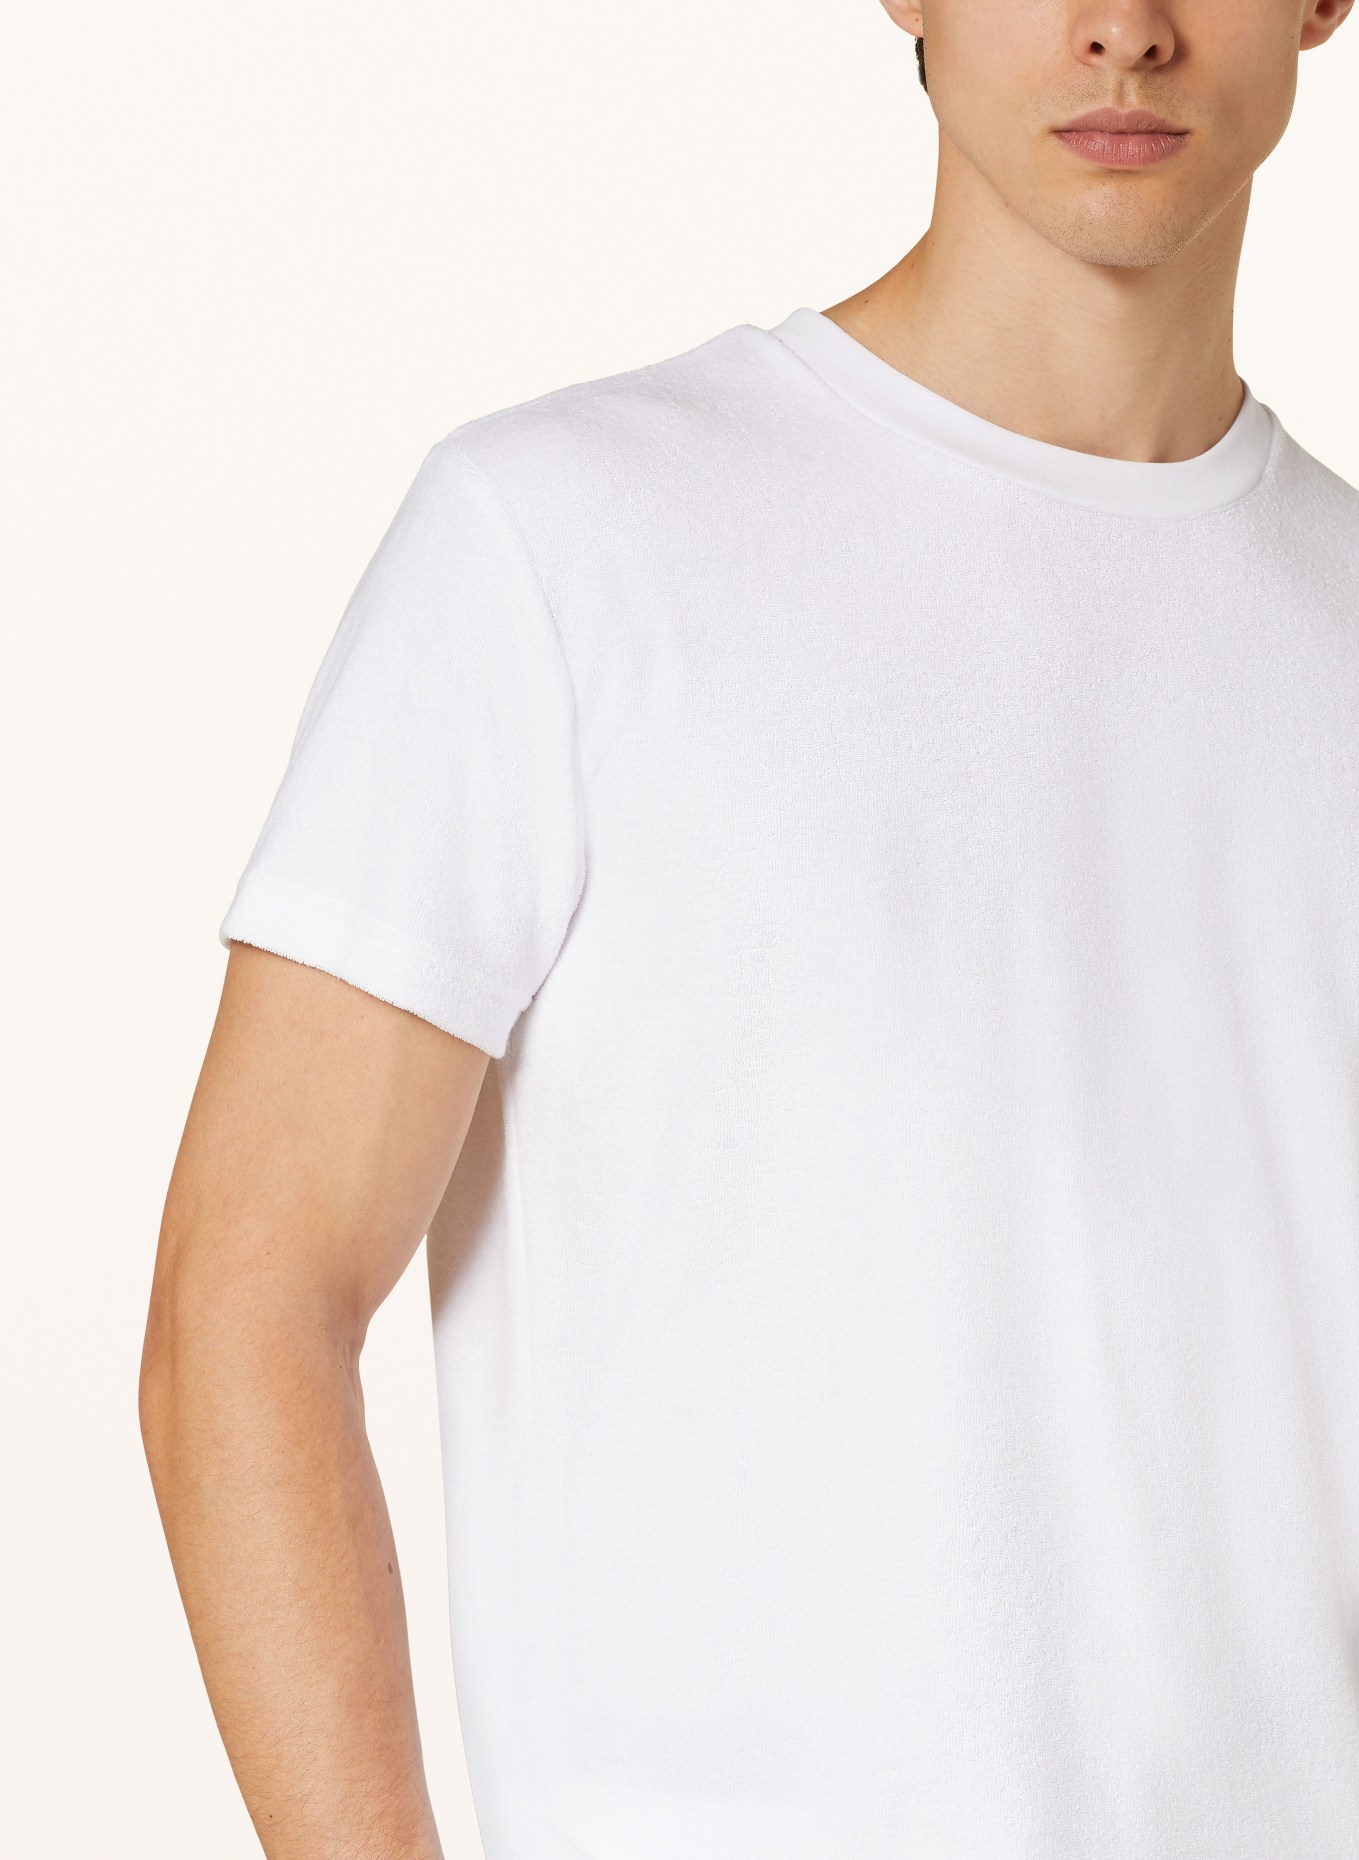 Calvin Klein T-shirt made of terry cloth, Color: WHITE (Image 4)